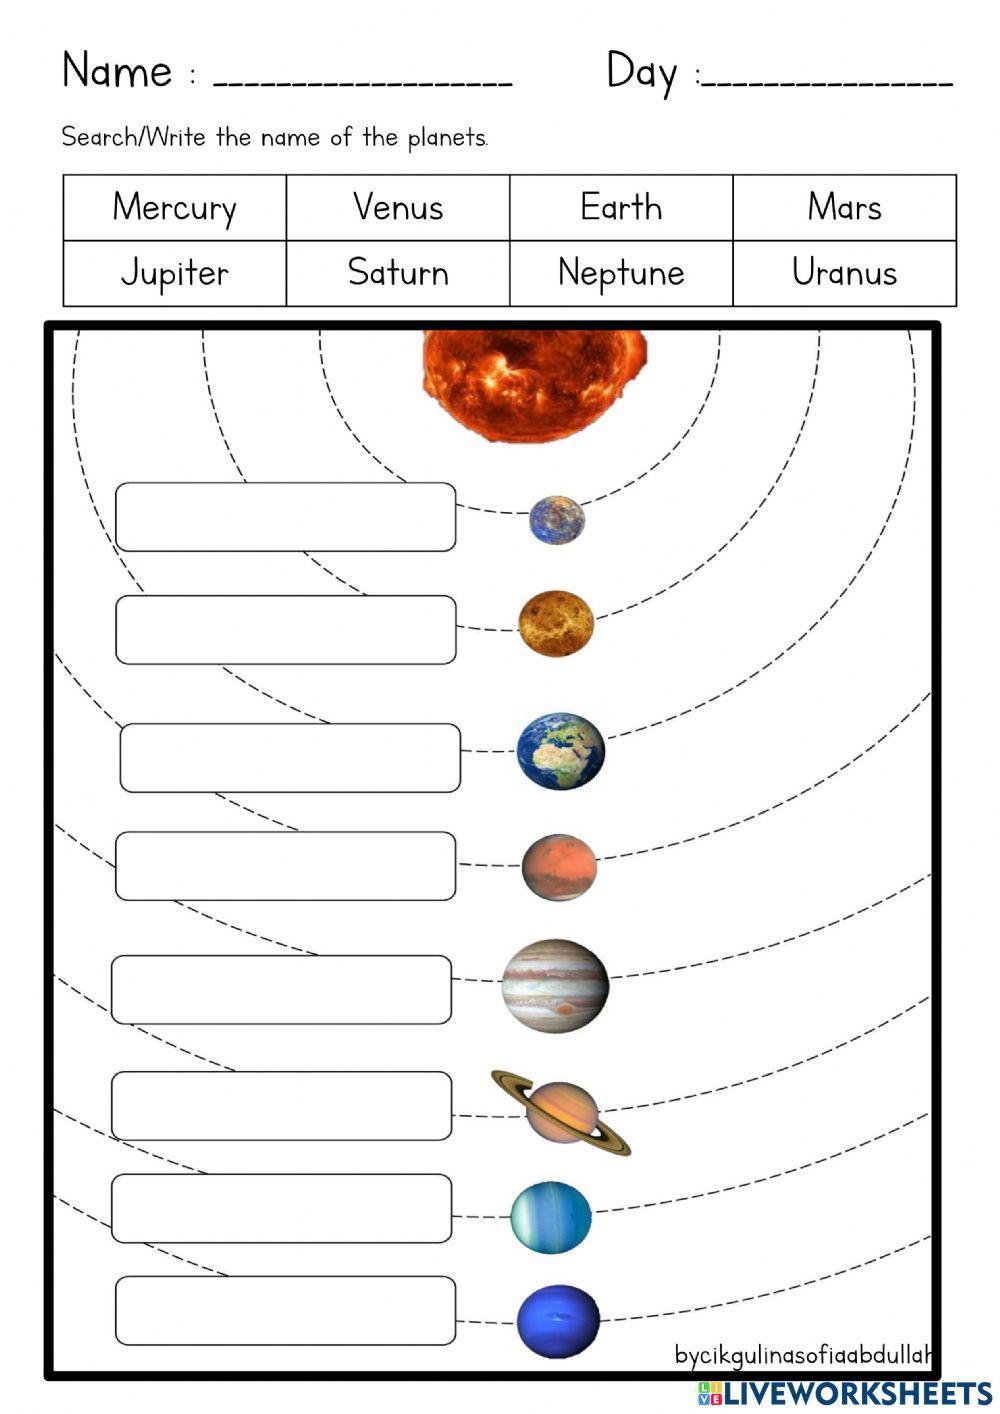 Name of the planets